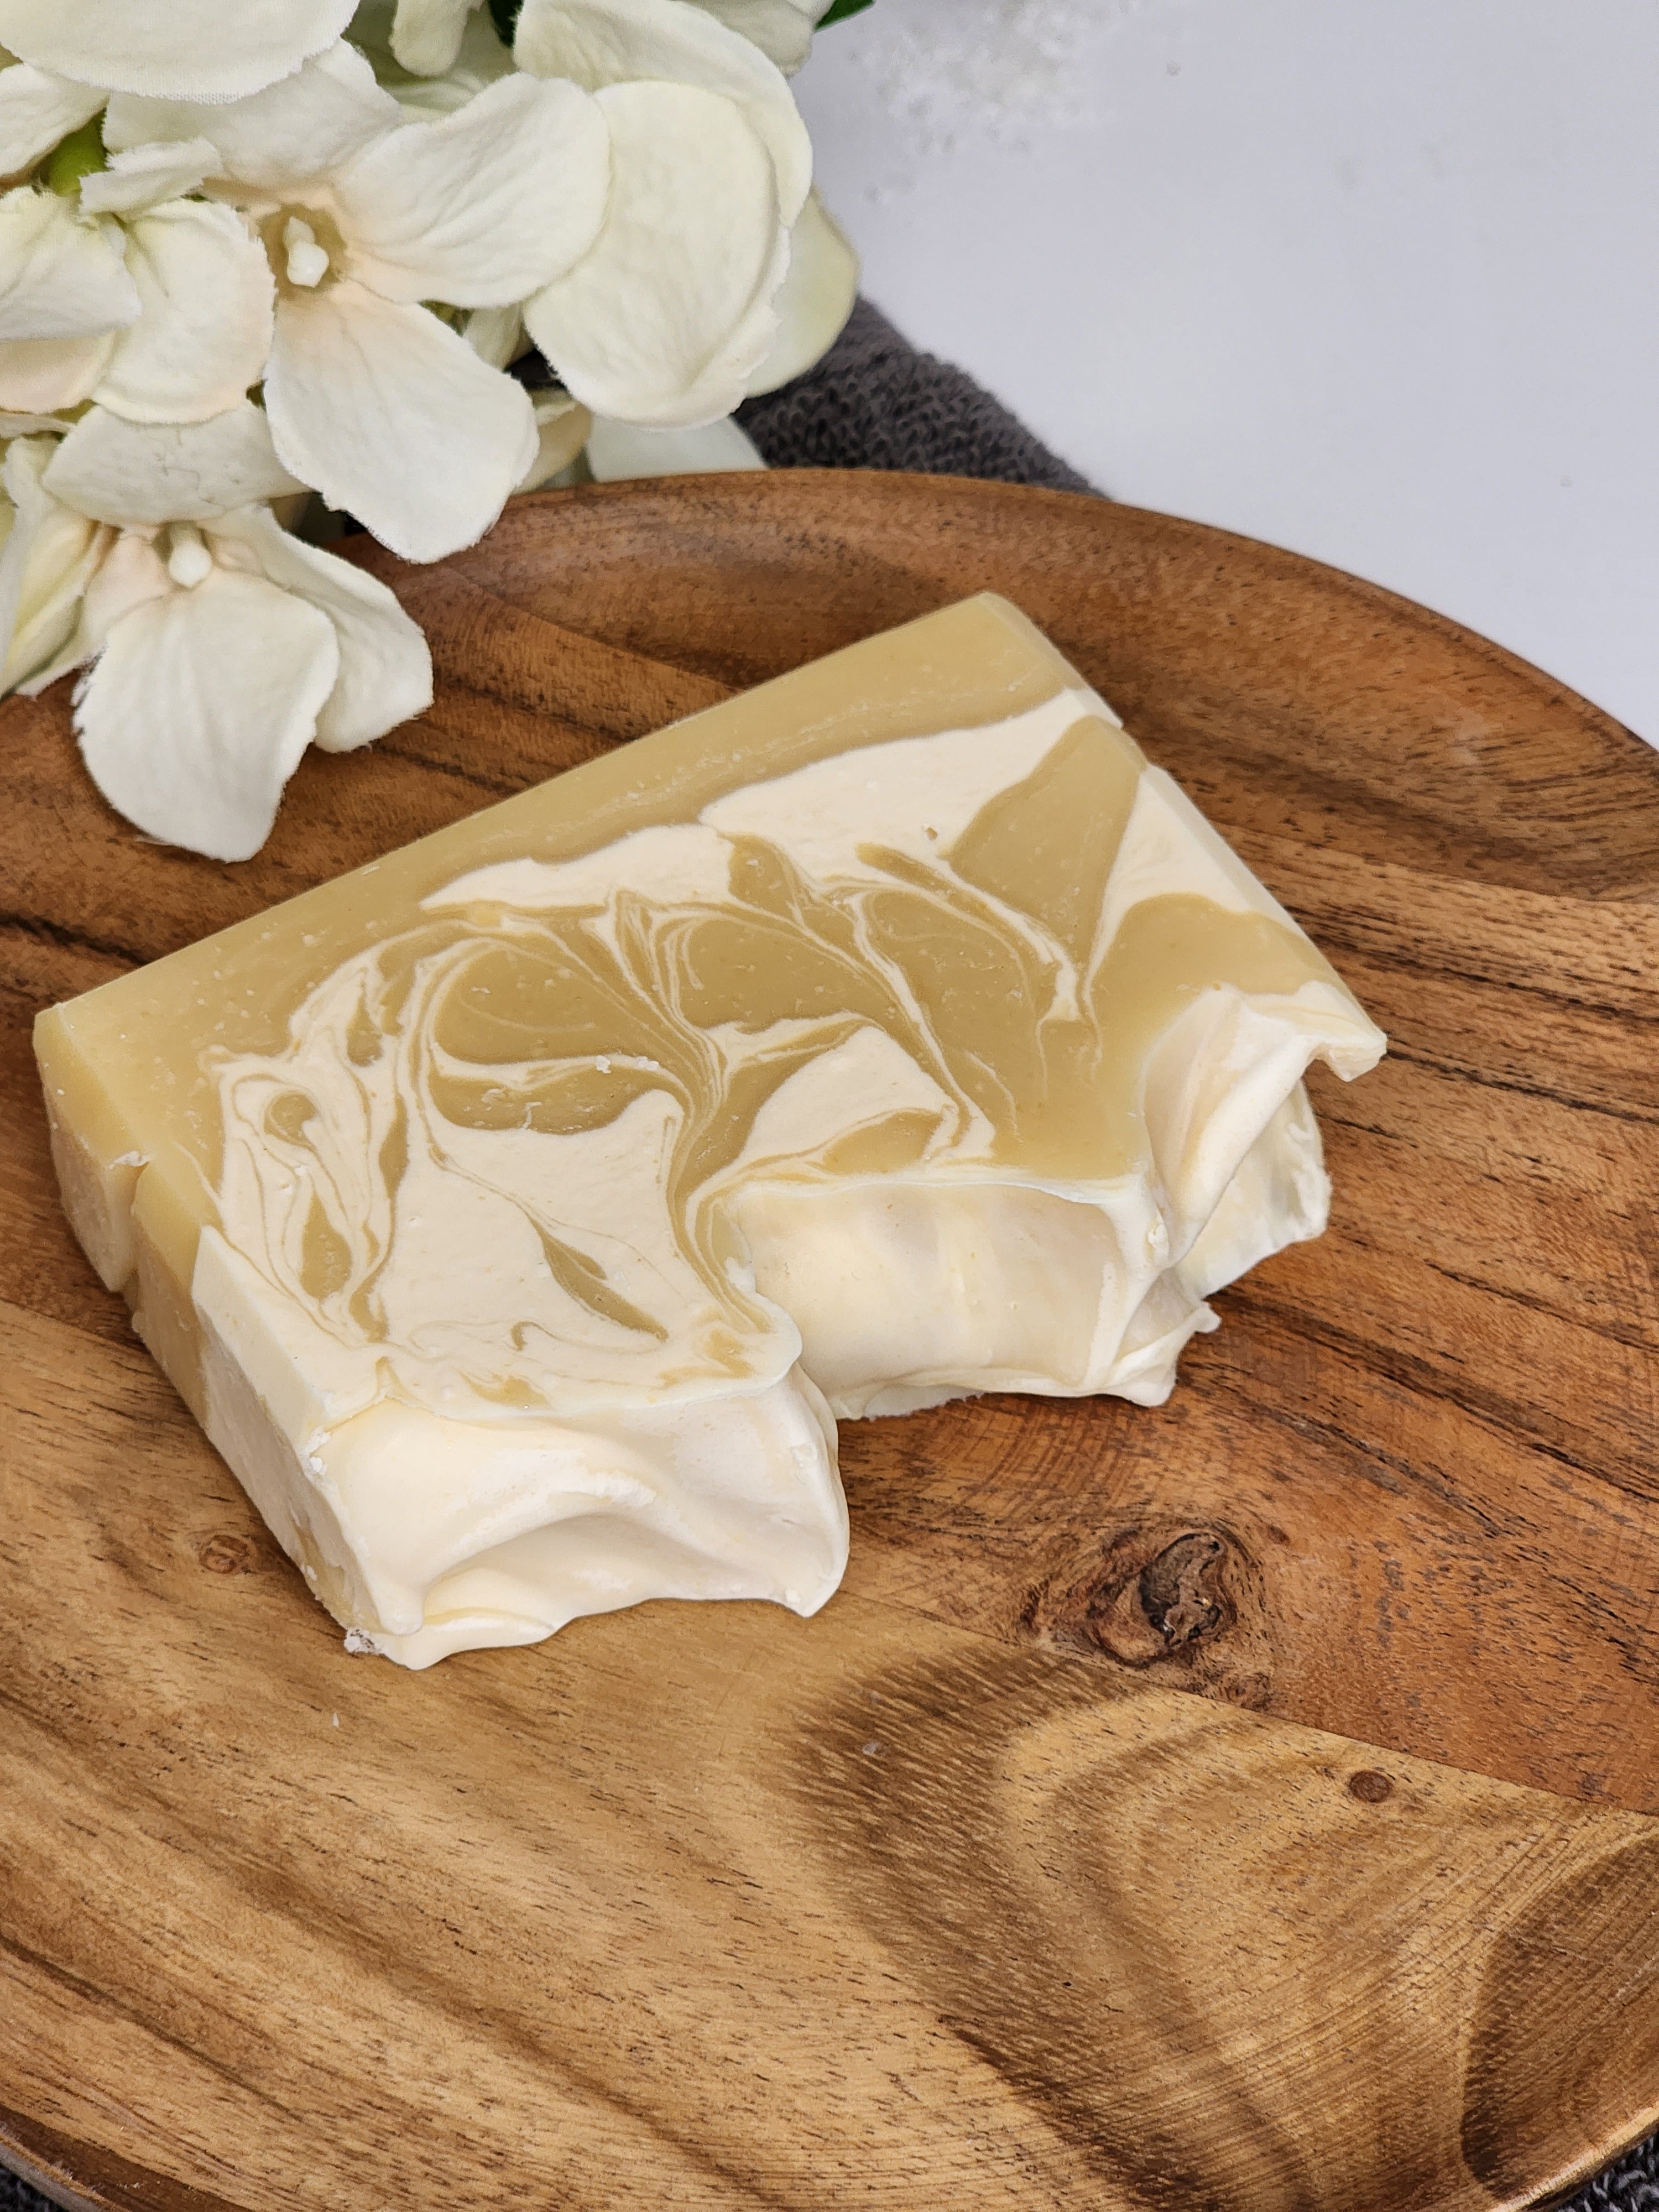 A naturally and white colored bar of handmade lemon and patchouli soap on a wooden platter